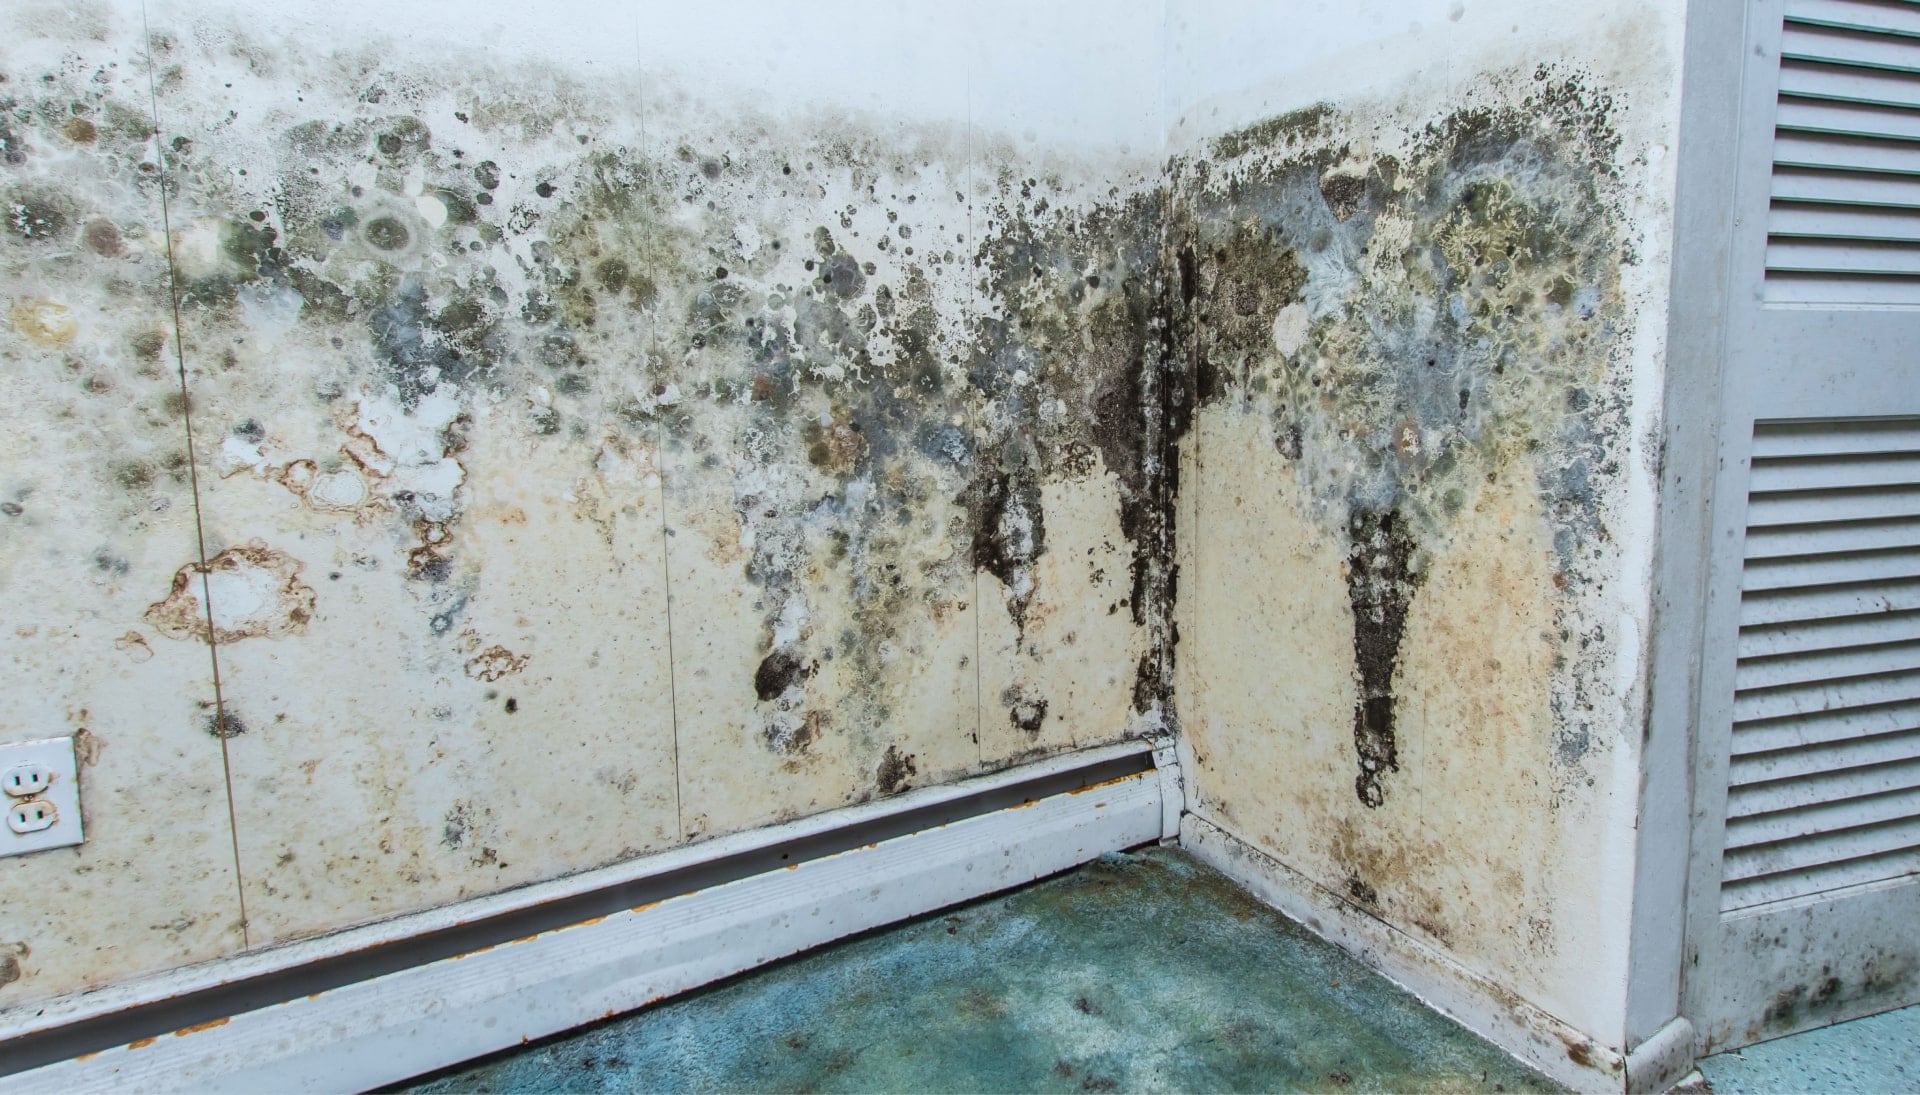 Professional mold removal, odor control, and water damage restoration service in Canton, Ohio.